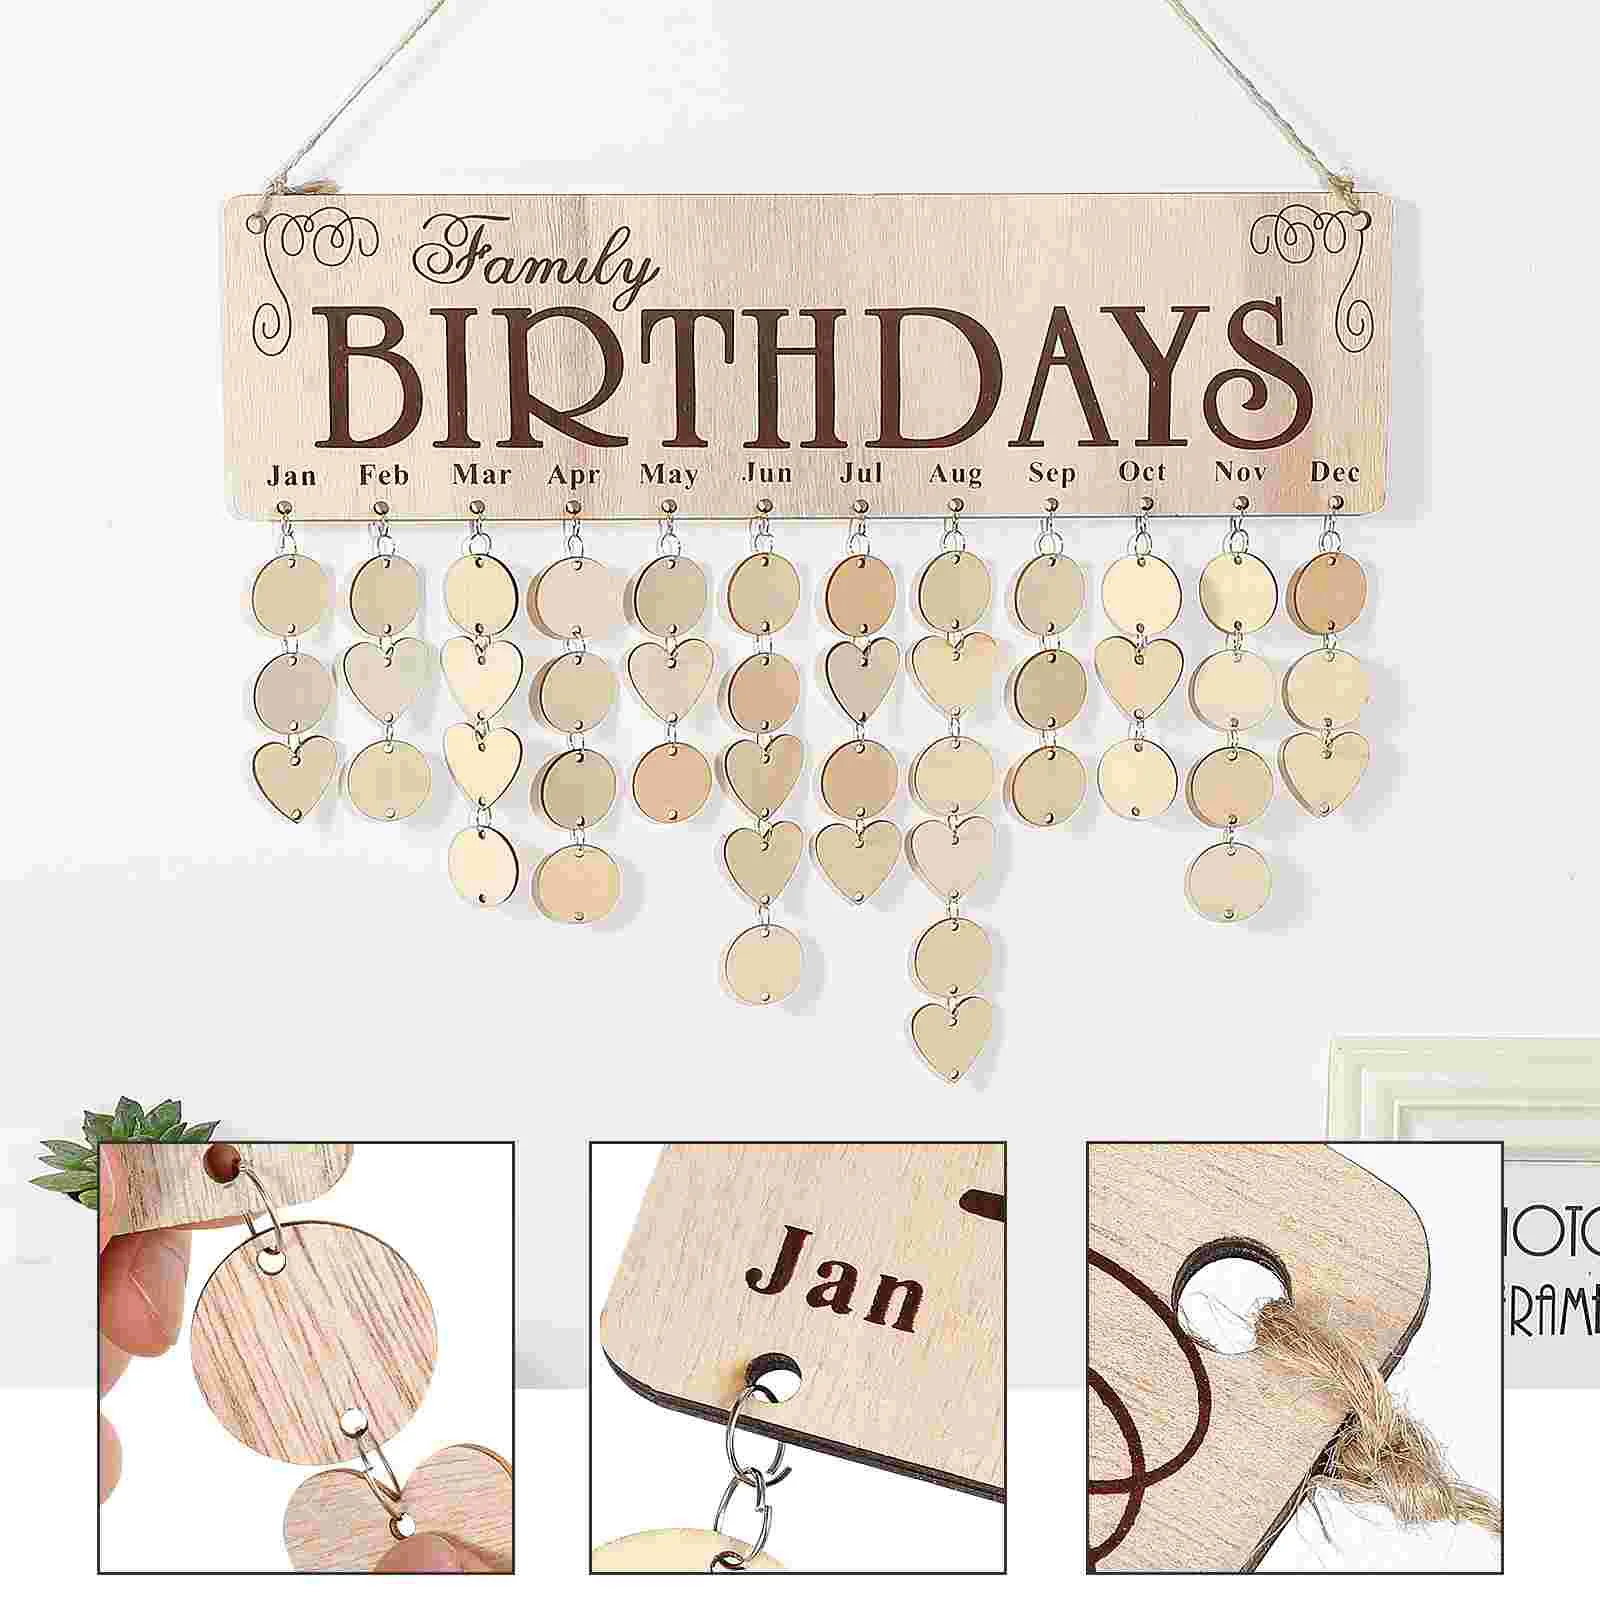 Calendar Birthday Wooden Family Board Hanging Wall Reminder Decor Tagsdiy Block home Advent Bulletin Plaque Board For Christmas reminder birthday calendar board wooden plaque wall hanging heartslice discs tag family decor